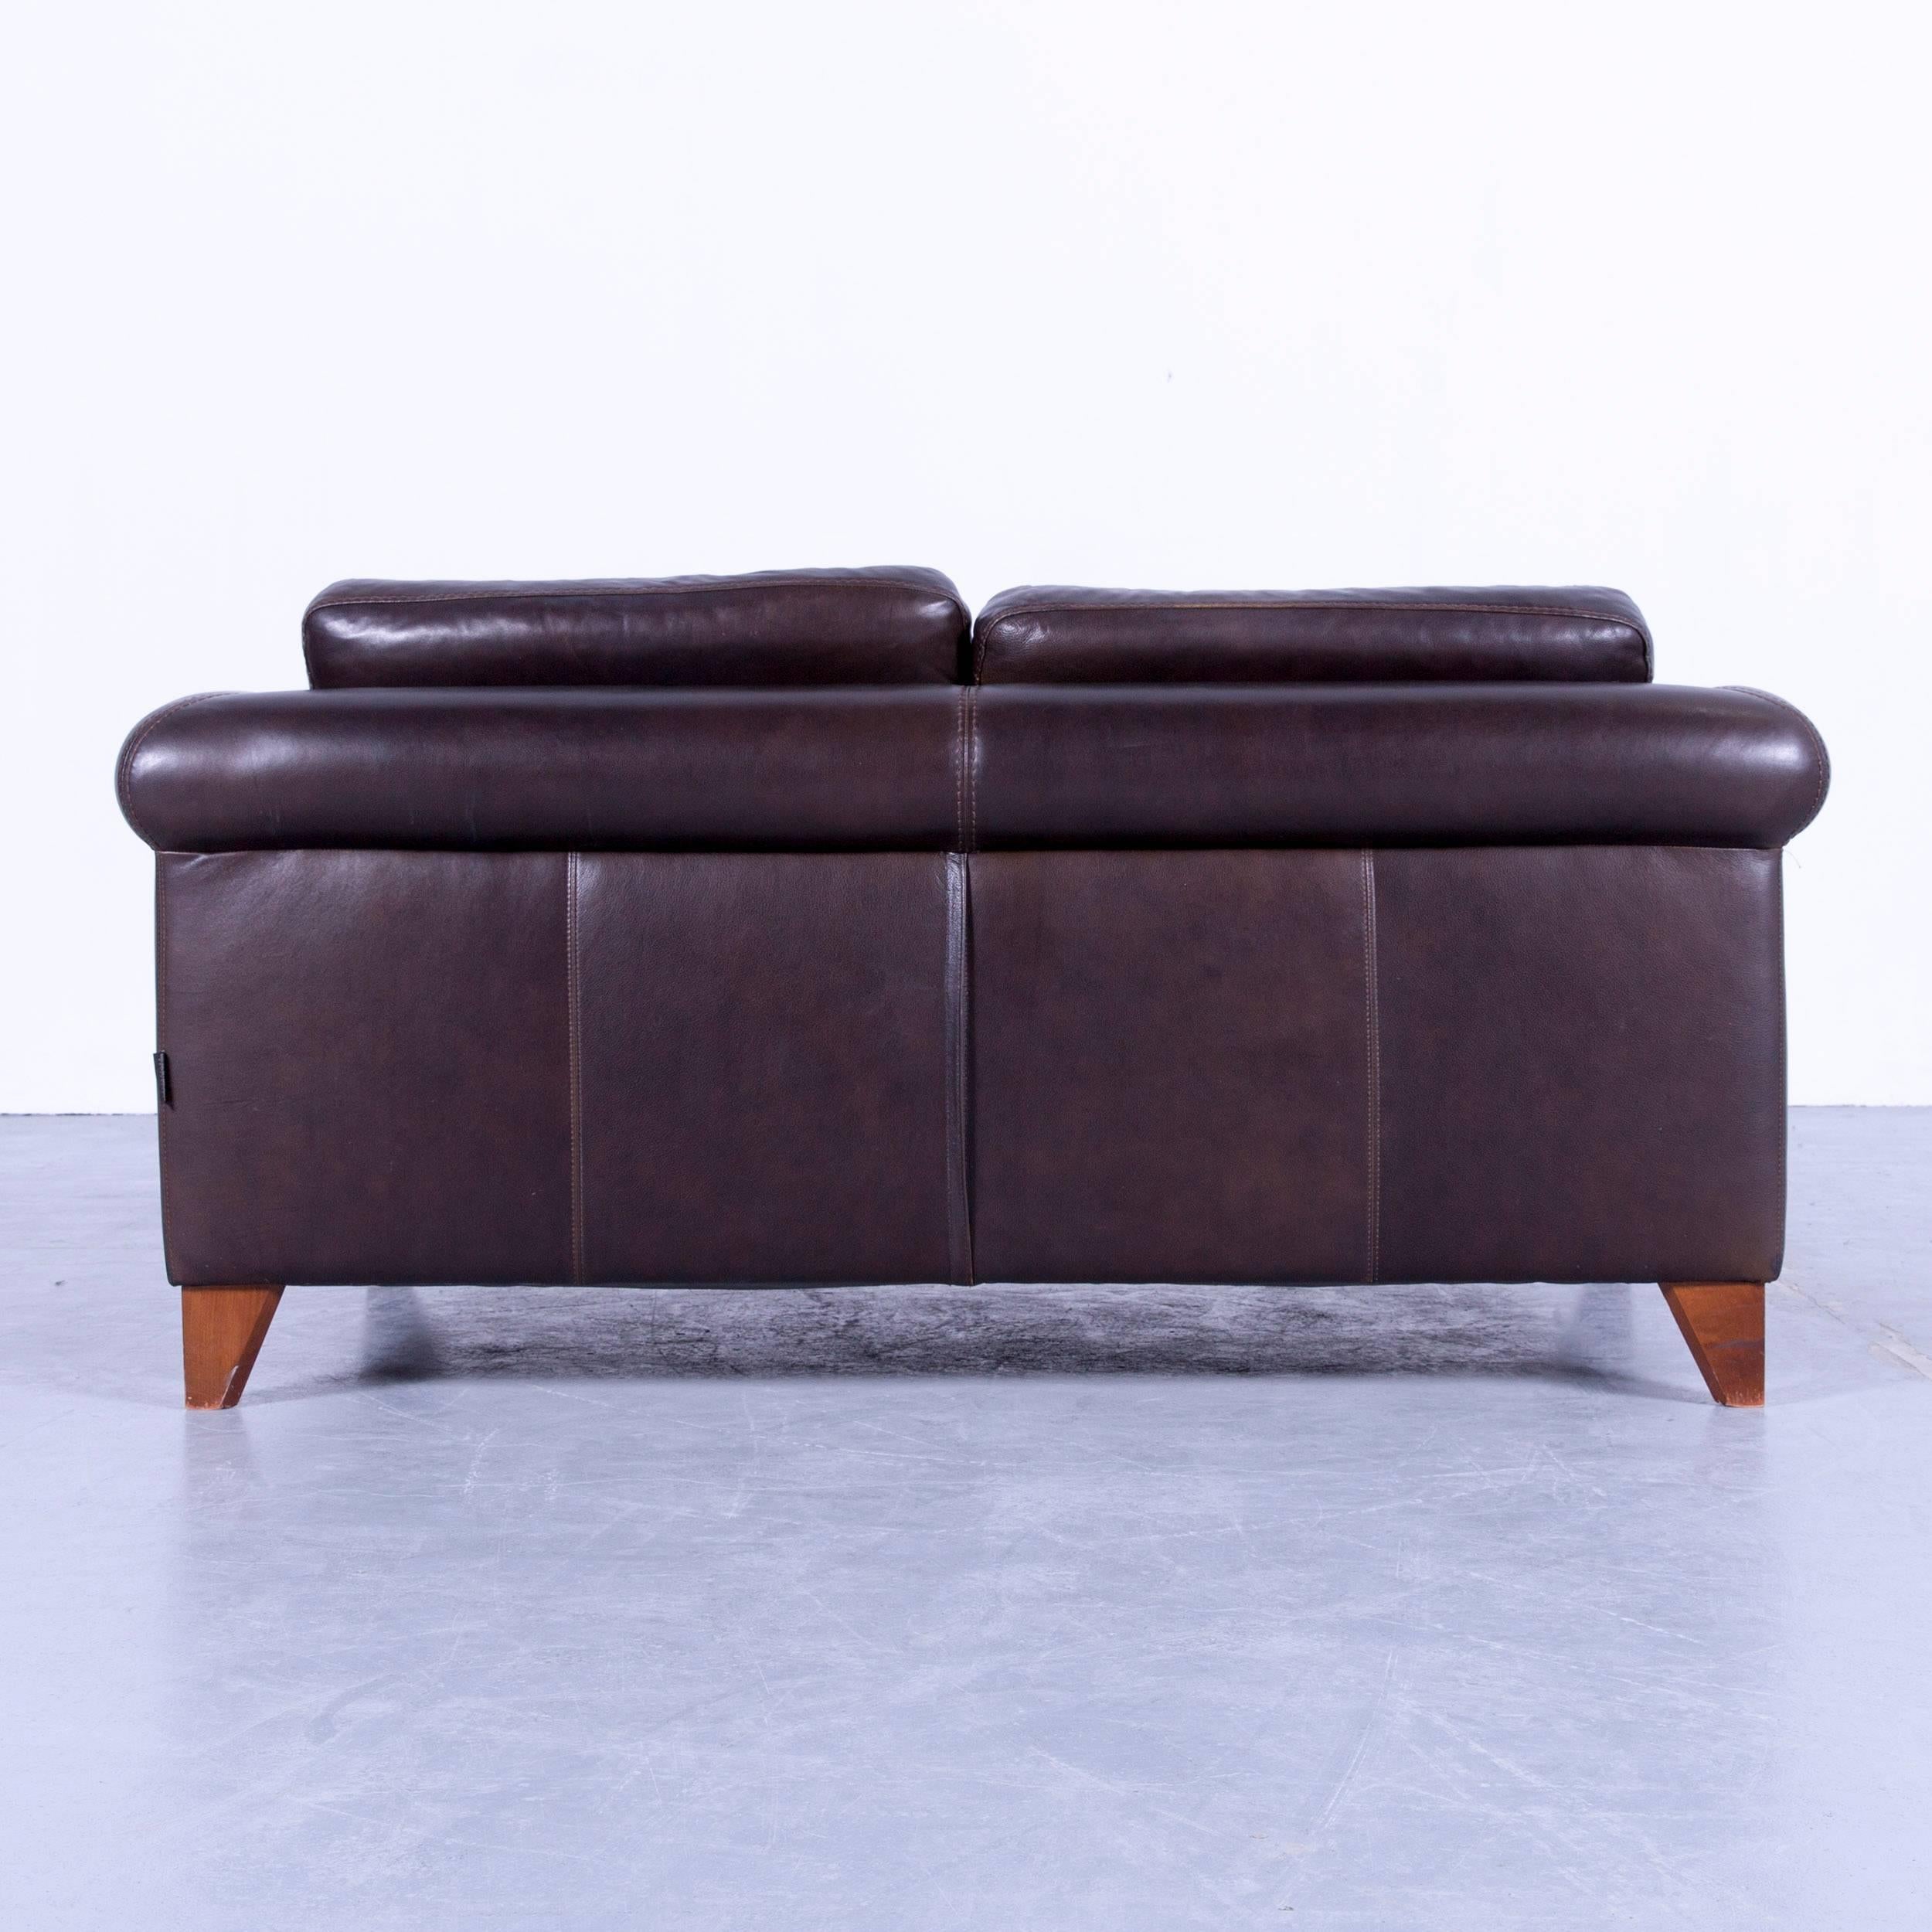 Machalke Designer Two-Seat Sofa Set and Armchair Leather Brown Couch Modern 4